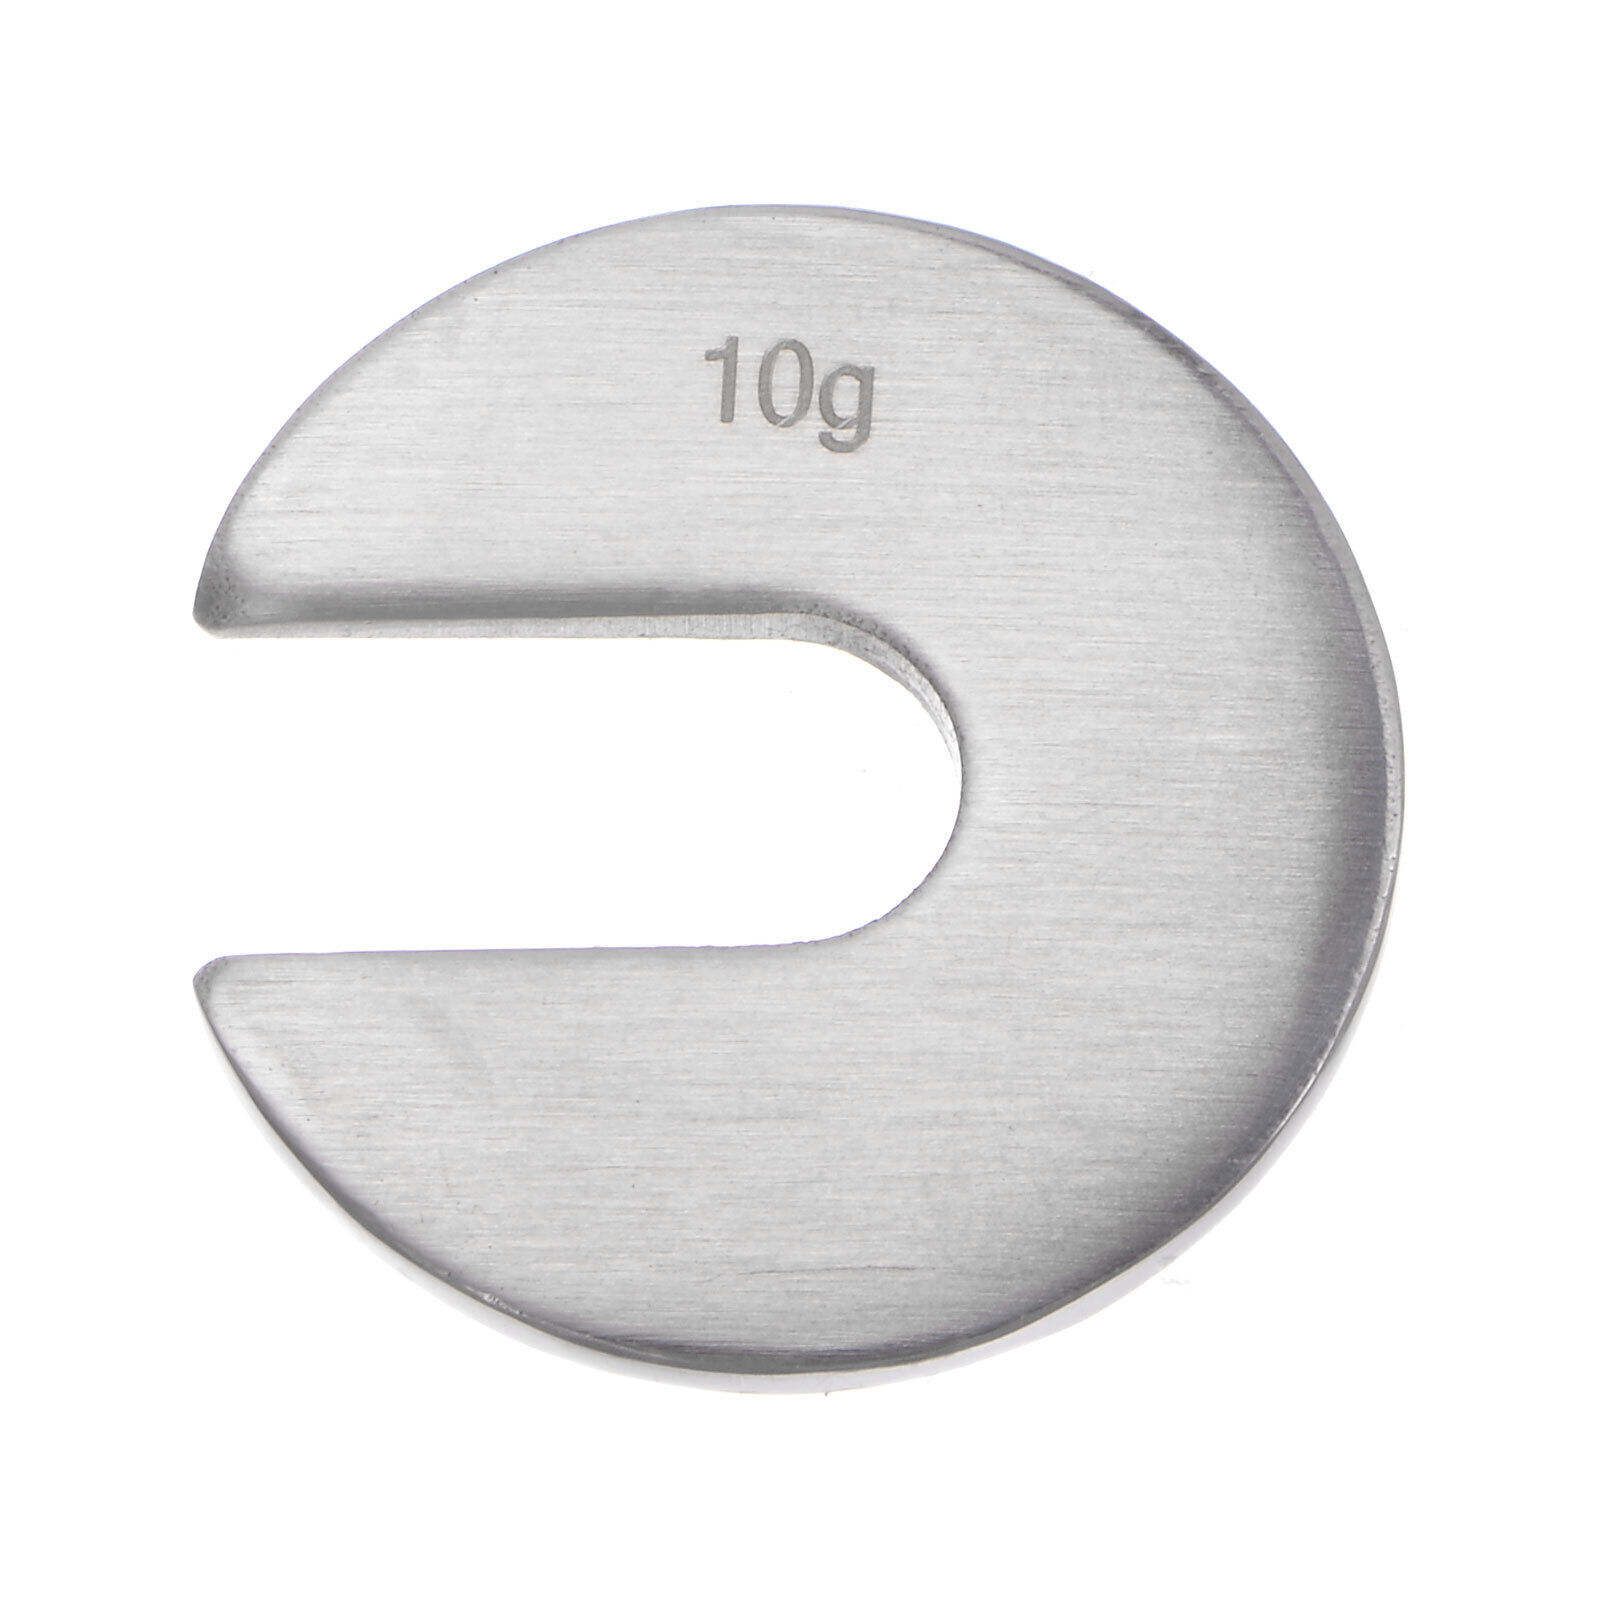 Slotted Calibration Weight 10g M1 Precision For Digital Balance Scales